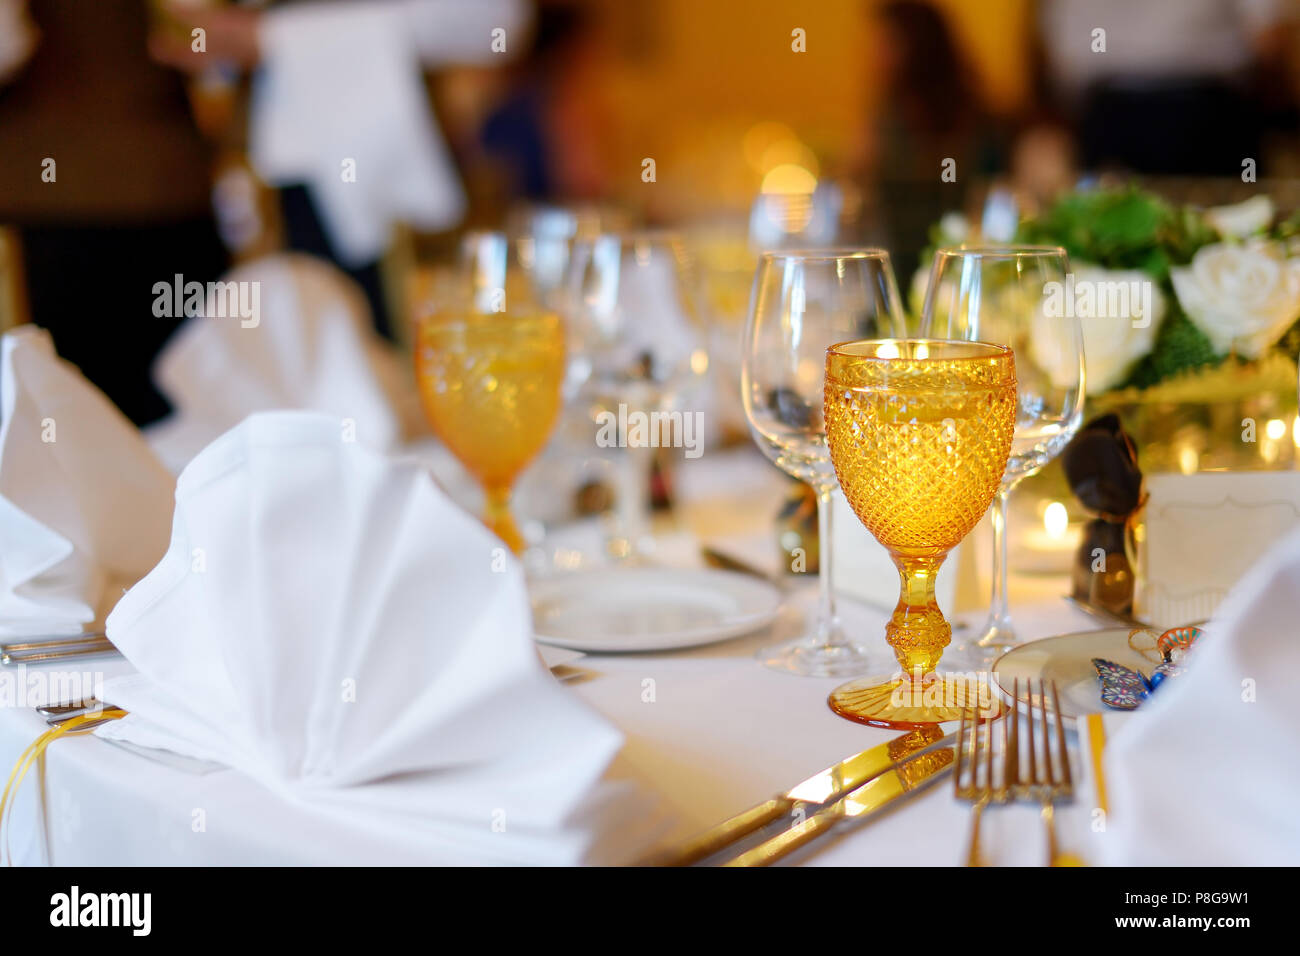 Table set for an event party or wedding reception Stock Photo